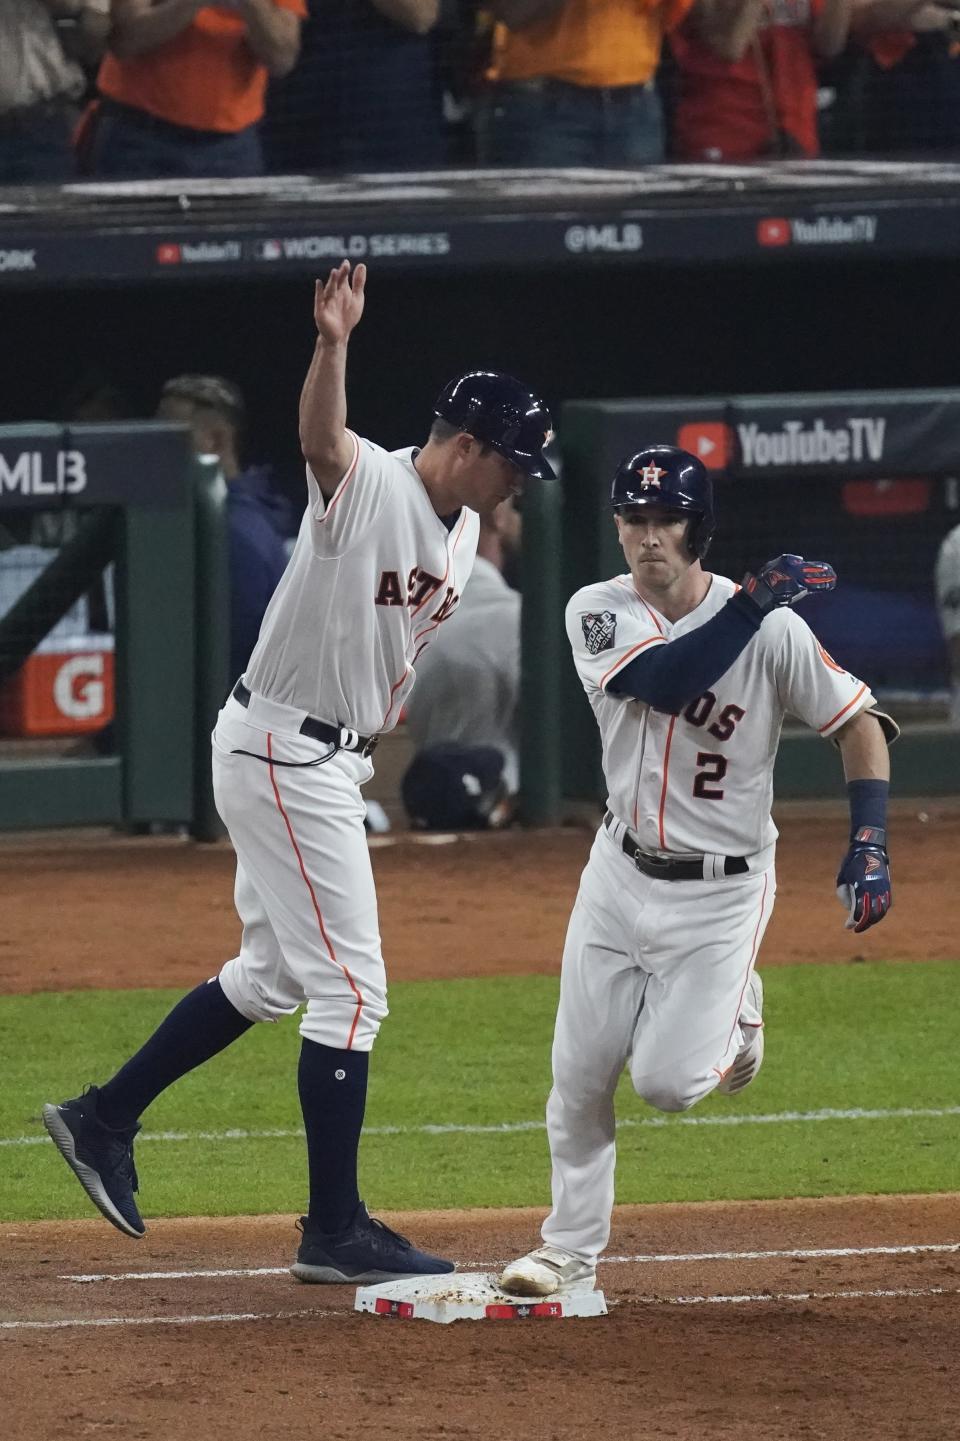 Houston Astros' Alex Bregman is congratulated by first base coach Don Kelly after hitting a two-run home run during the first inning of Game 2 of the baseball World Series against the Washington Nationals Wednesday, Oct. 23, 2019, in Houston. (AP Photo/Eric Gay)